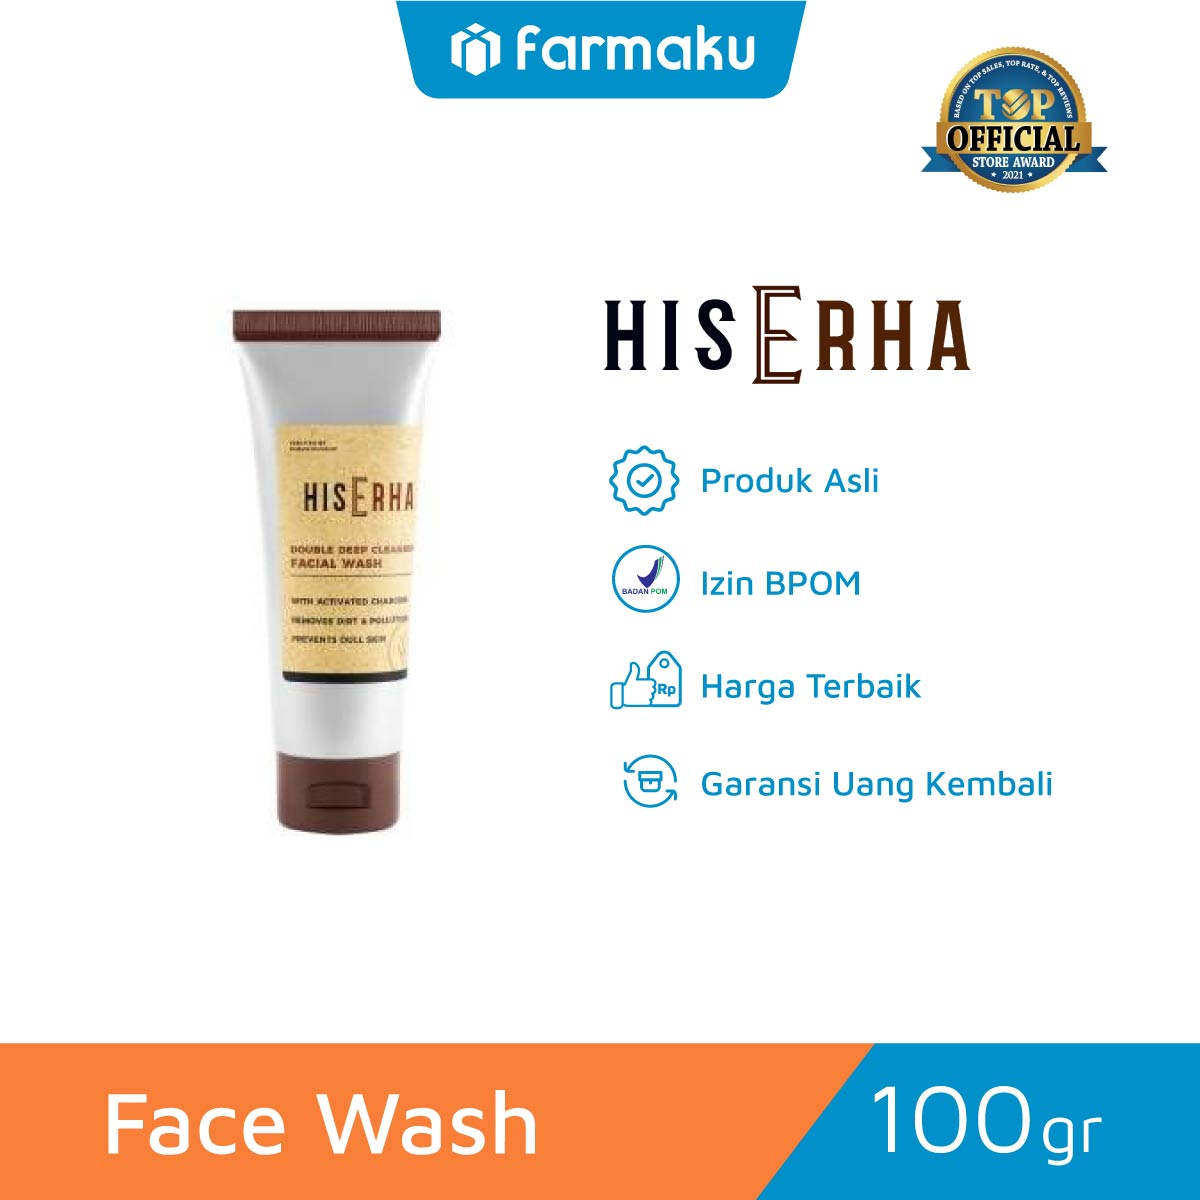 His Erha Facial Wash Double Deep Cleansing